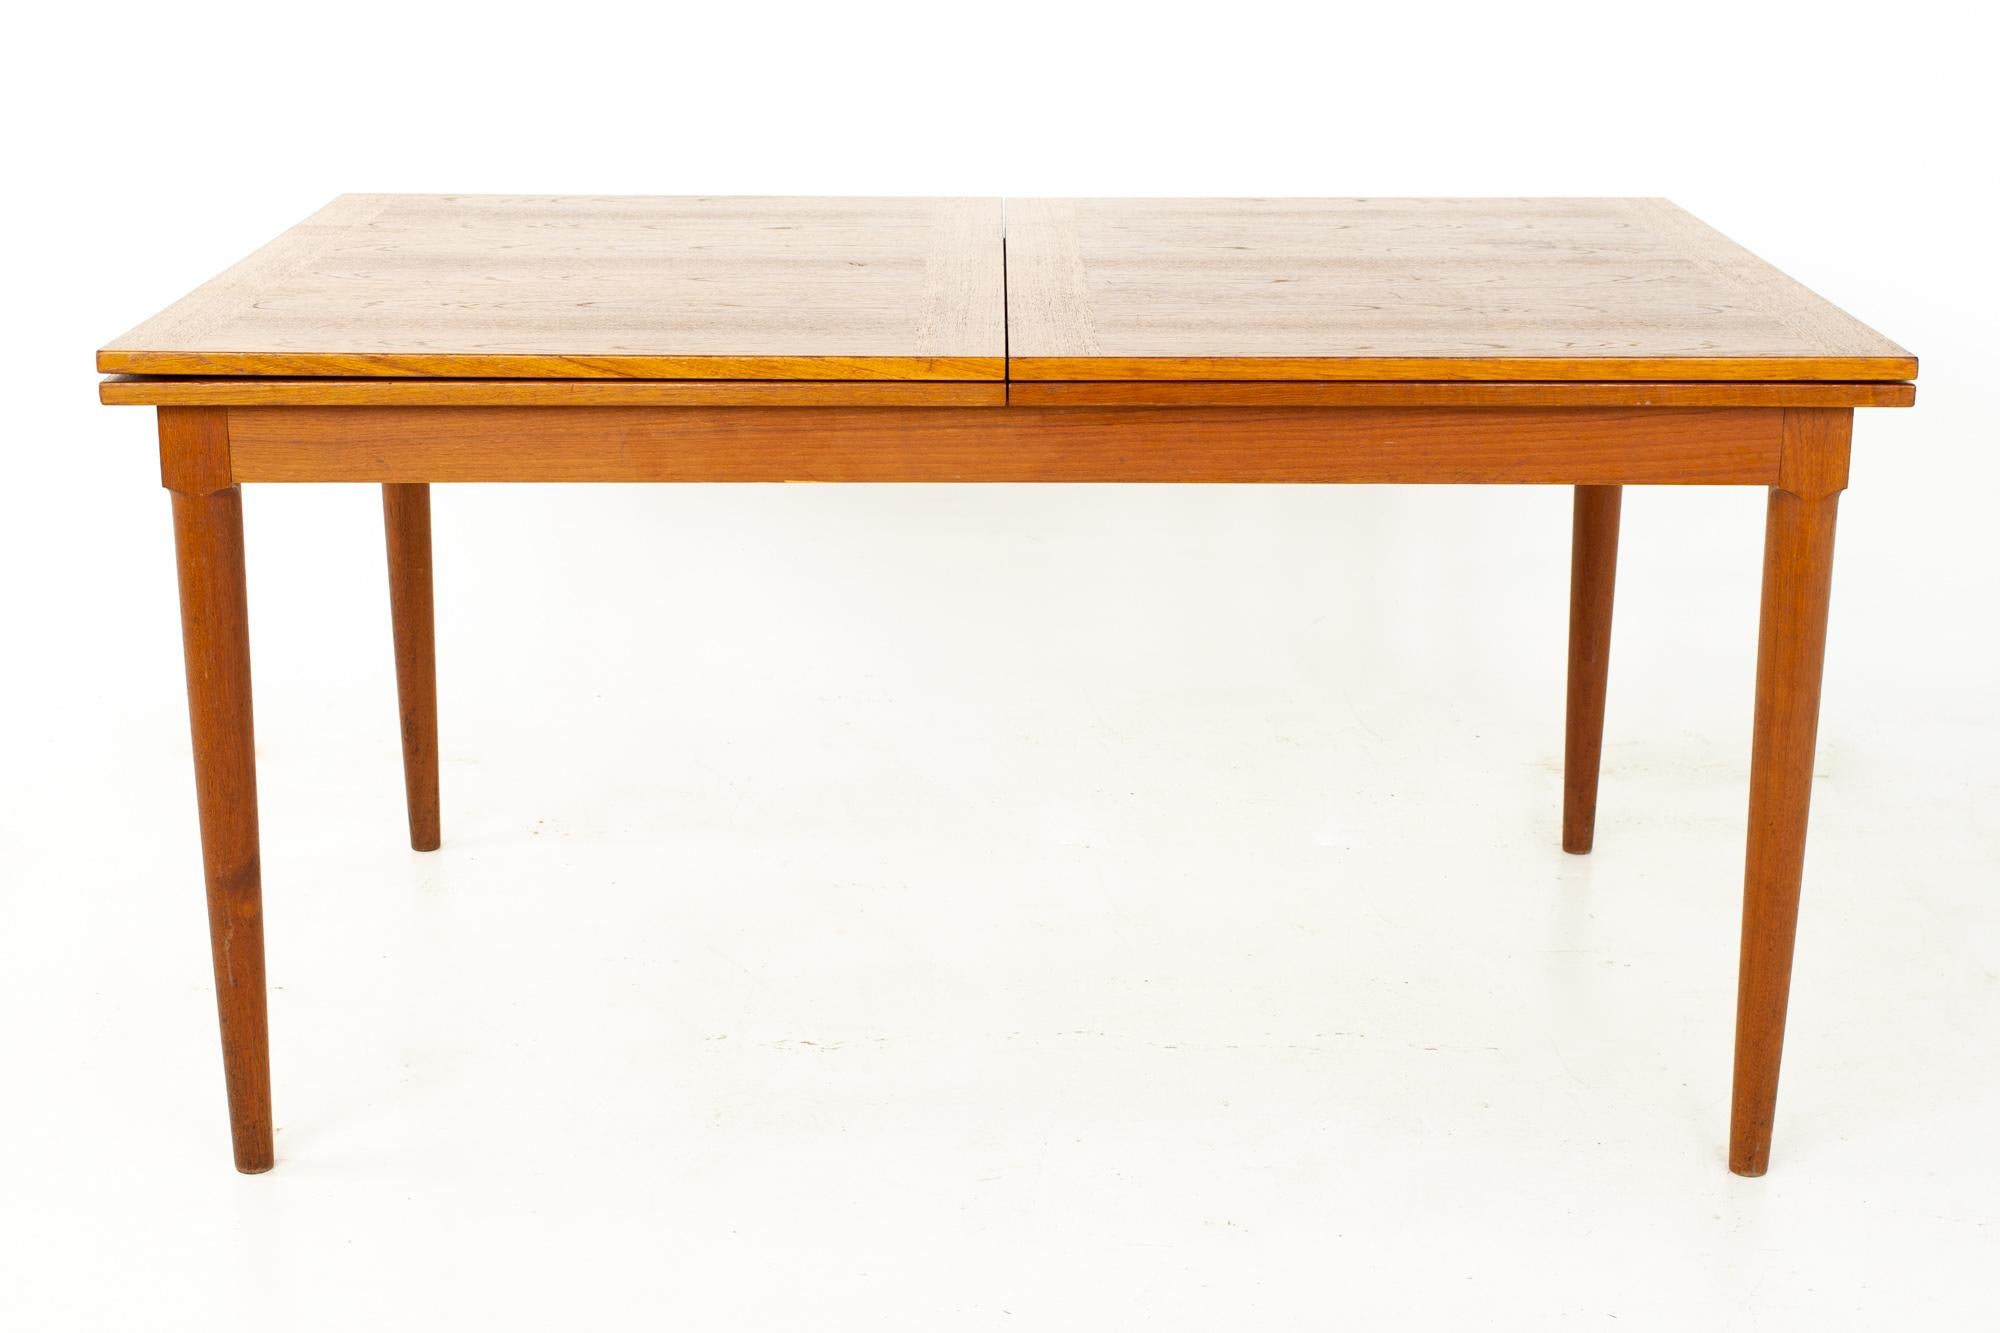 Skovmand and Andersen mid century teak hidden leaf dining table

Table measures: 57 wide x 37.5 deep x 29 inches high

?All pieces of furniture can be had in what we call restored vintage condition. That means the piece is restored upon purchase